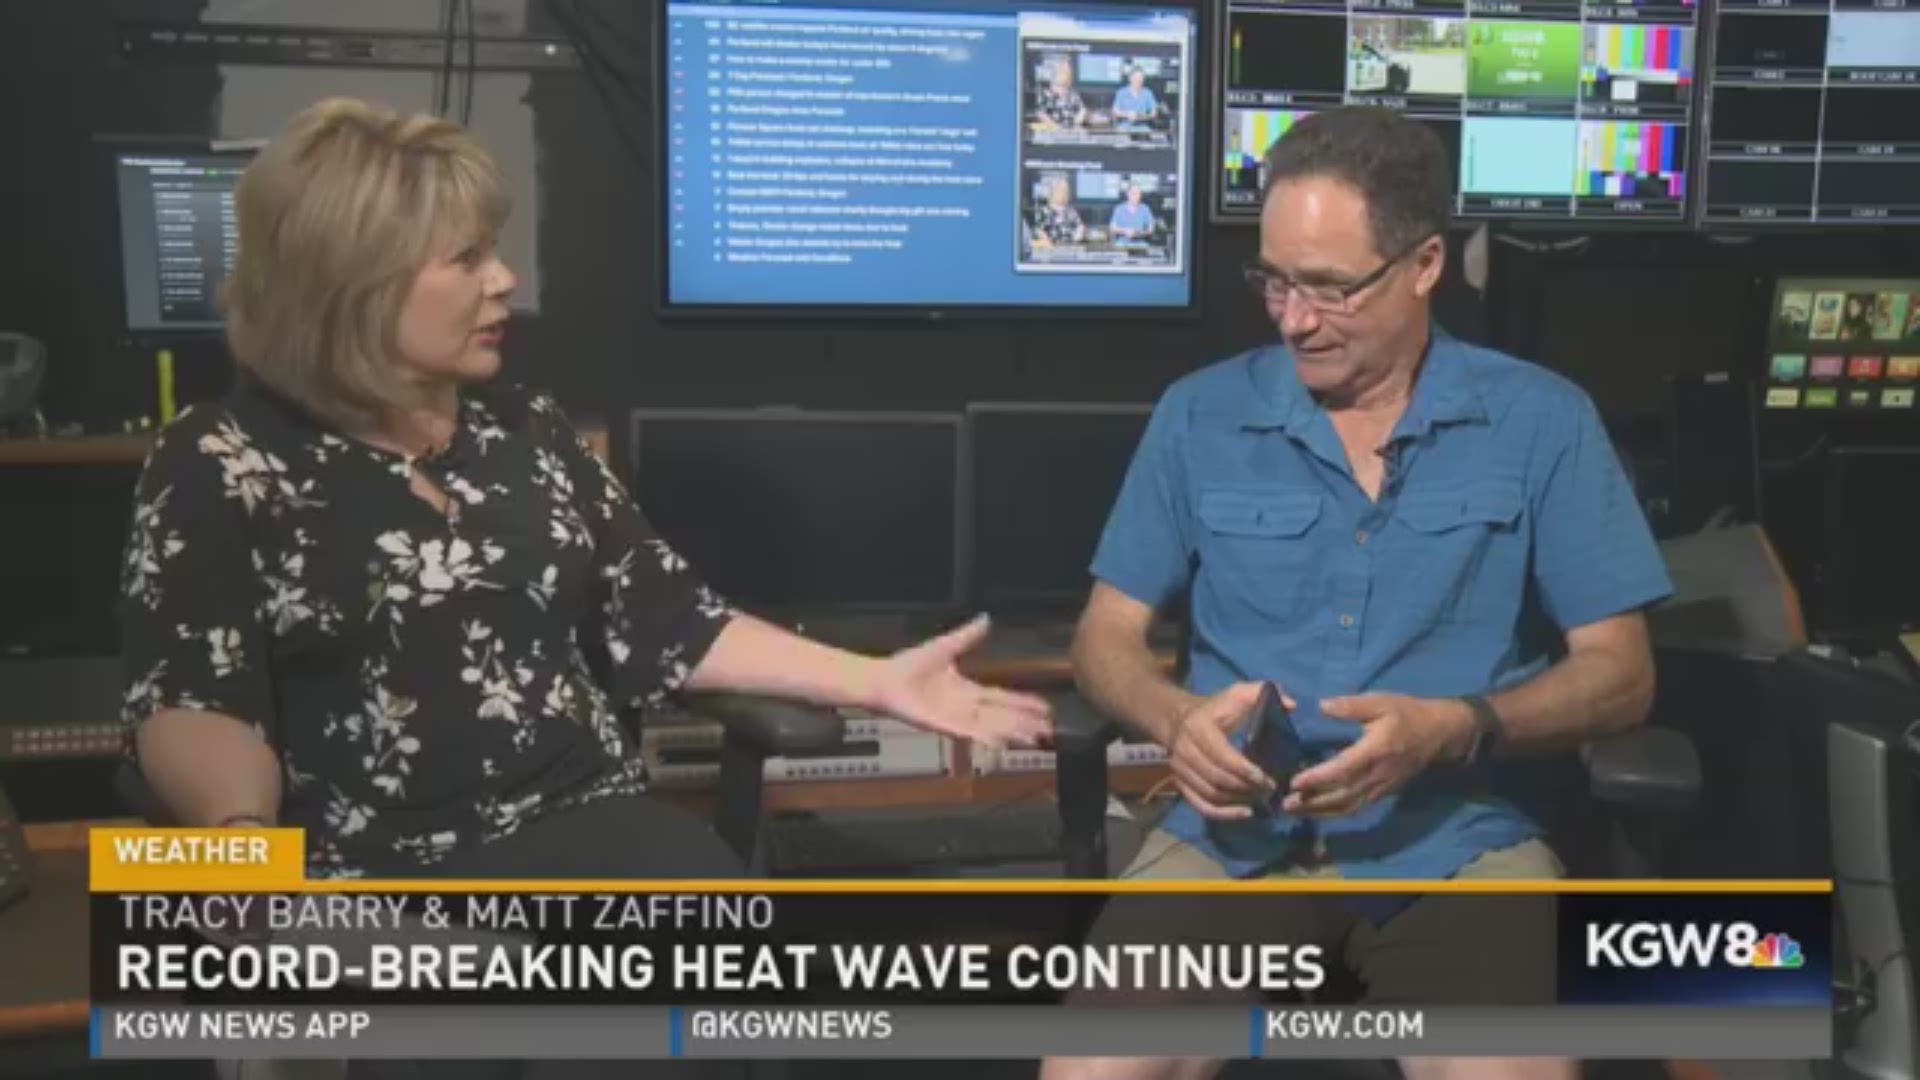 KGW's Tracy Barry interviews chief meteorologist Matt Zaffino about the current heat wave in Portland, Oregon. KGW, Aug. 2, 2017